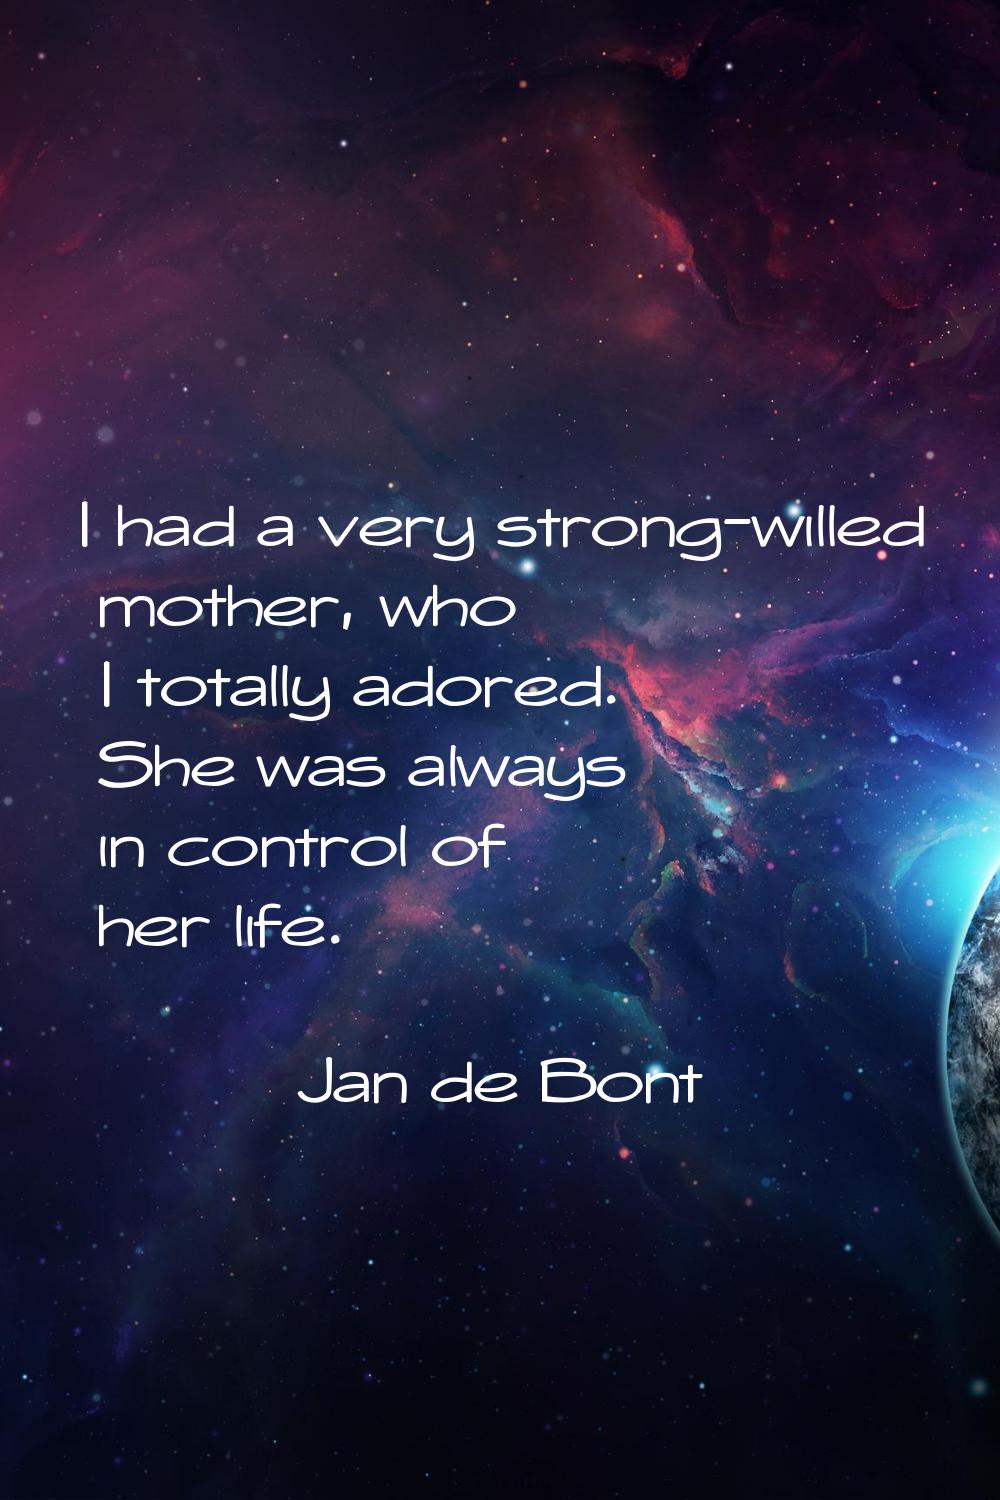 I had a very strong-willed mother, who I totally adored. She was always in control of her life.